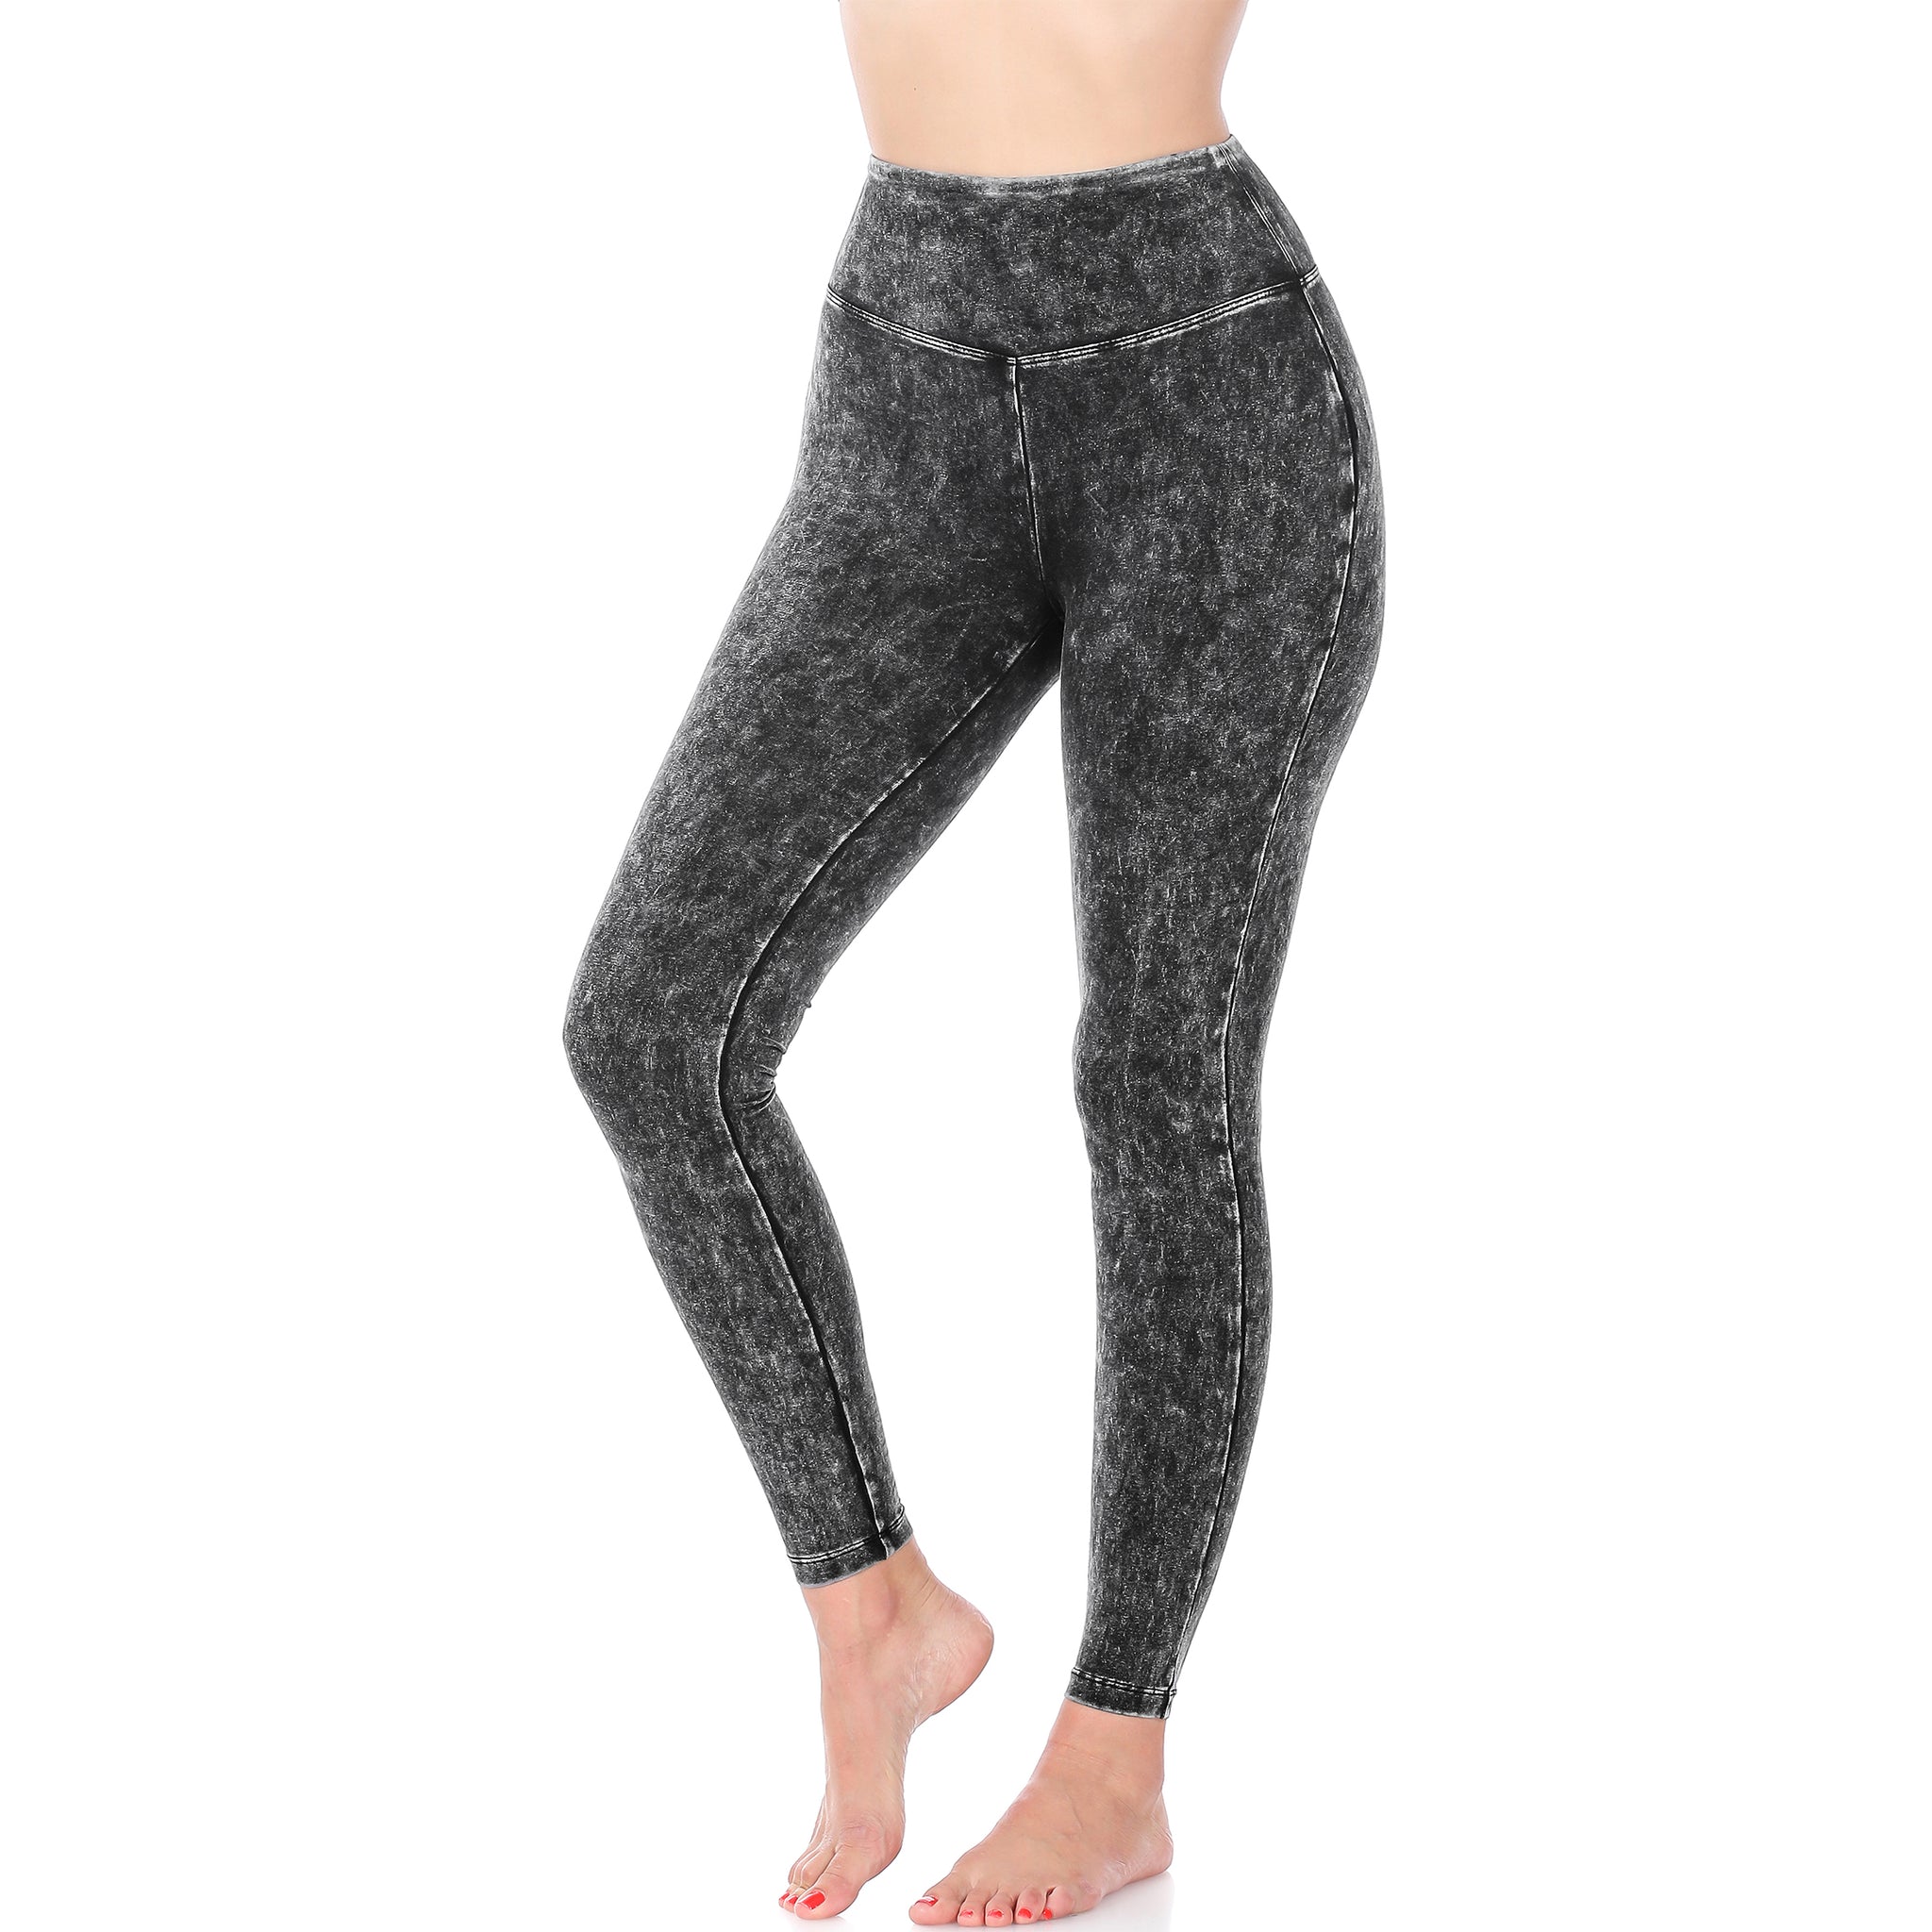 MINERAL WASHED WIDE WAISTBAND YOGA LEGGINGS – Arelia's Dream